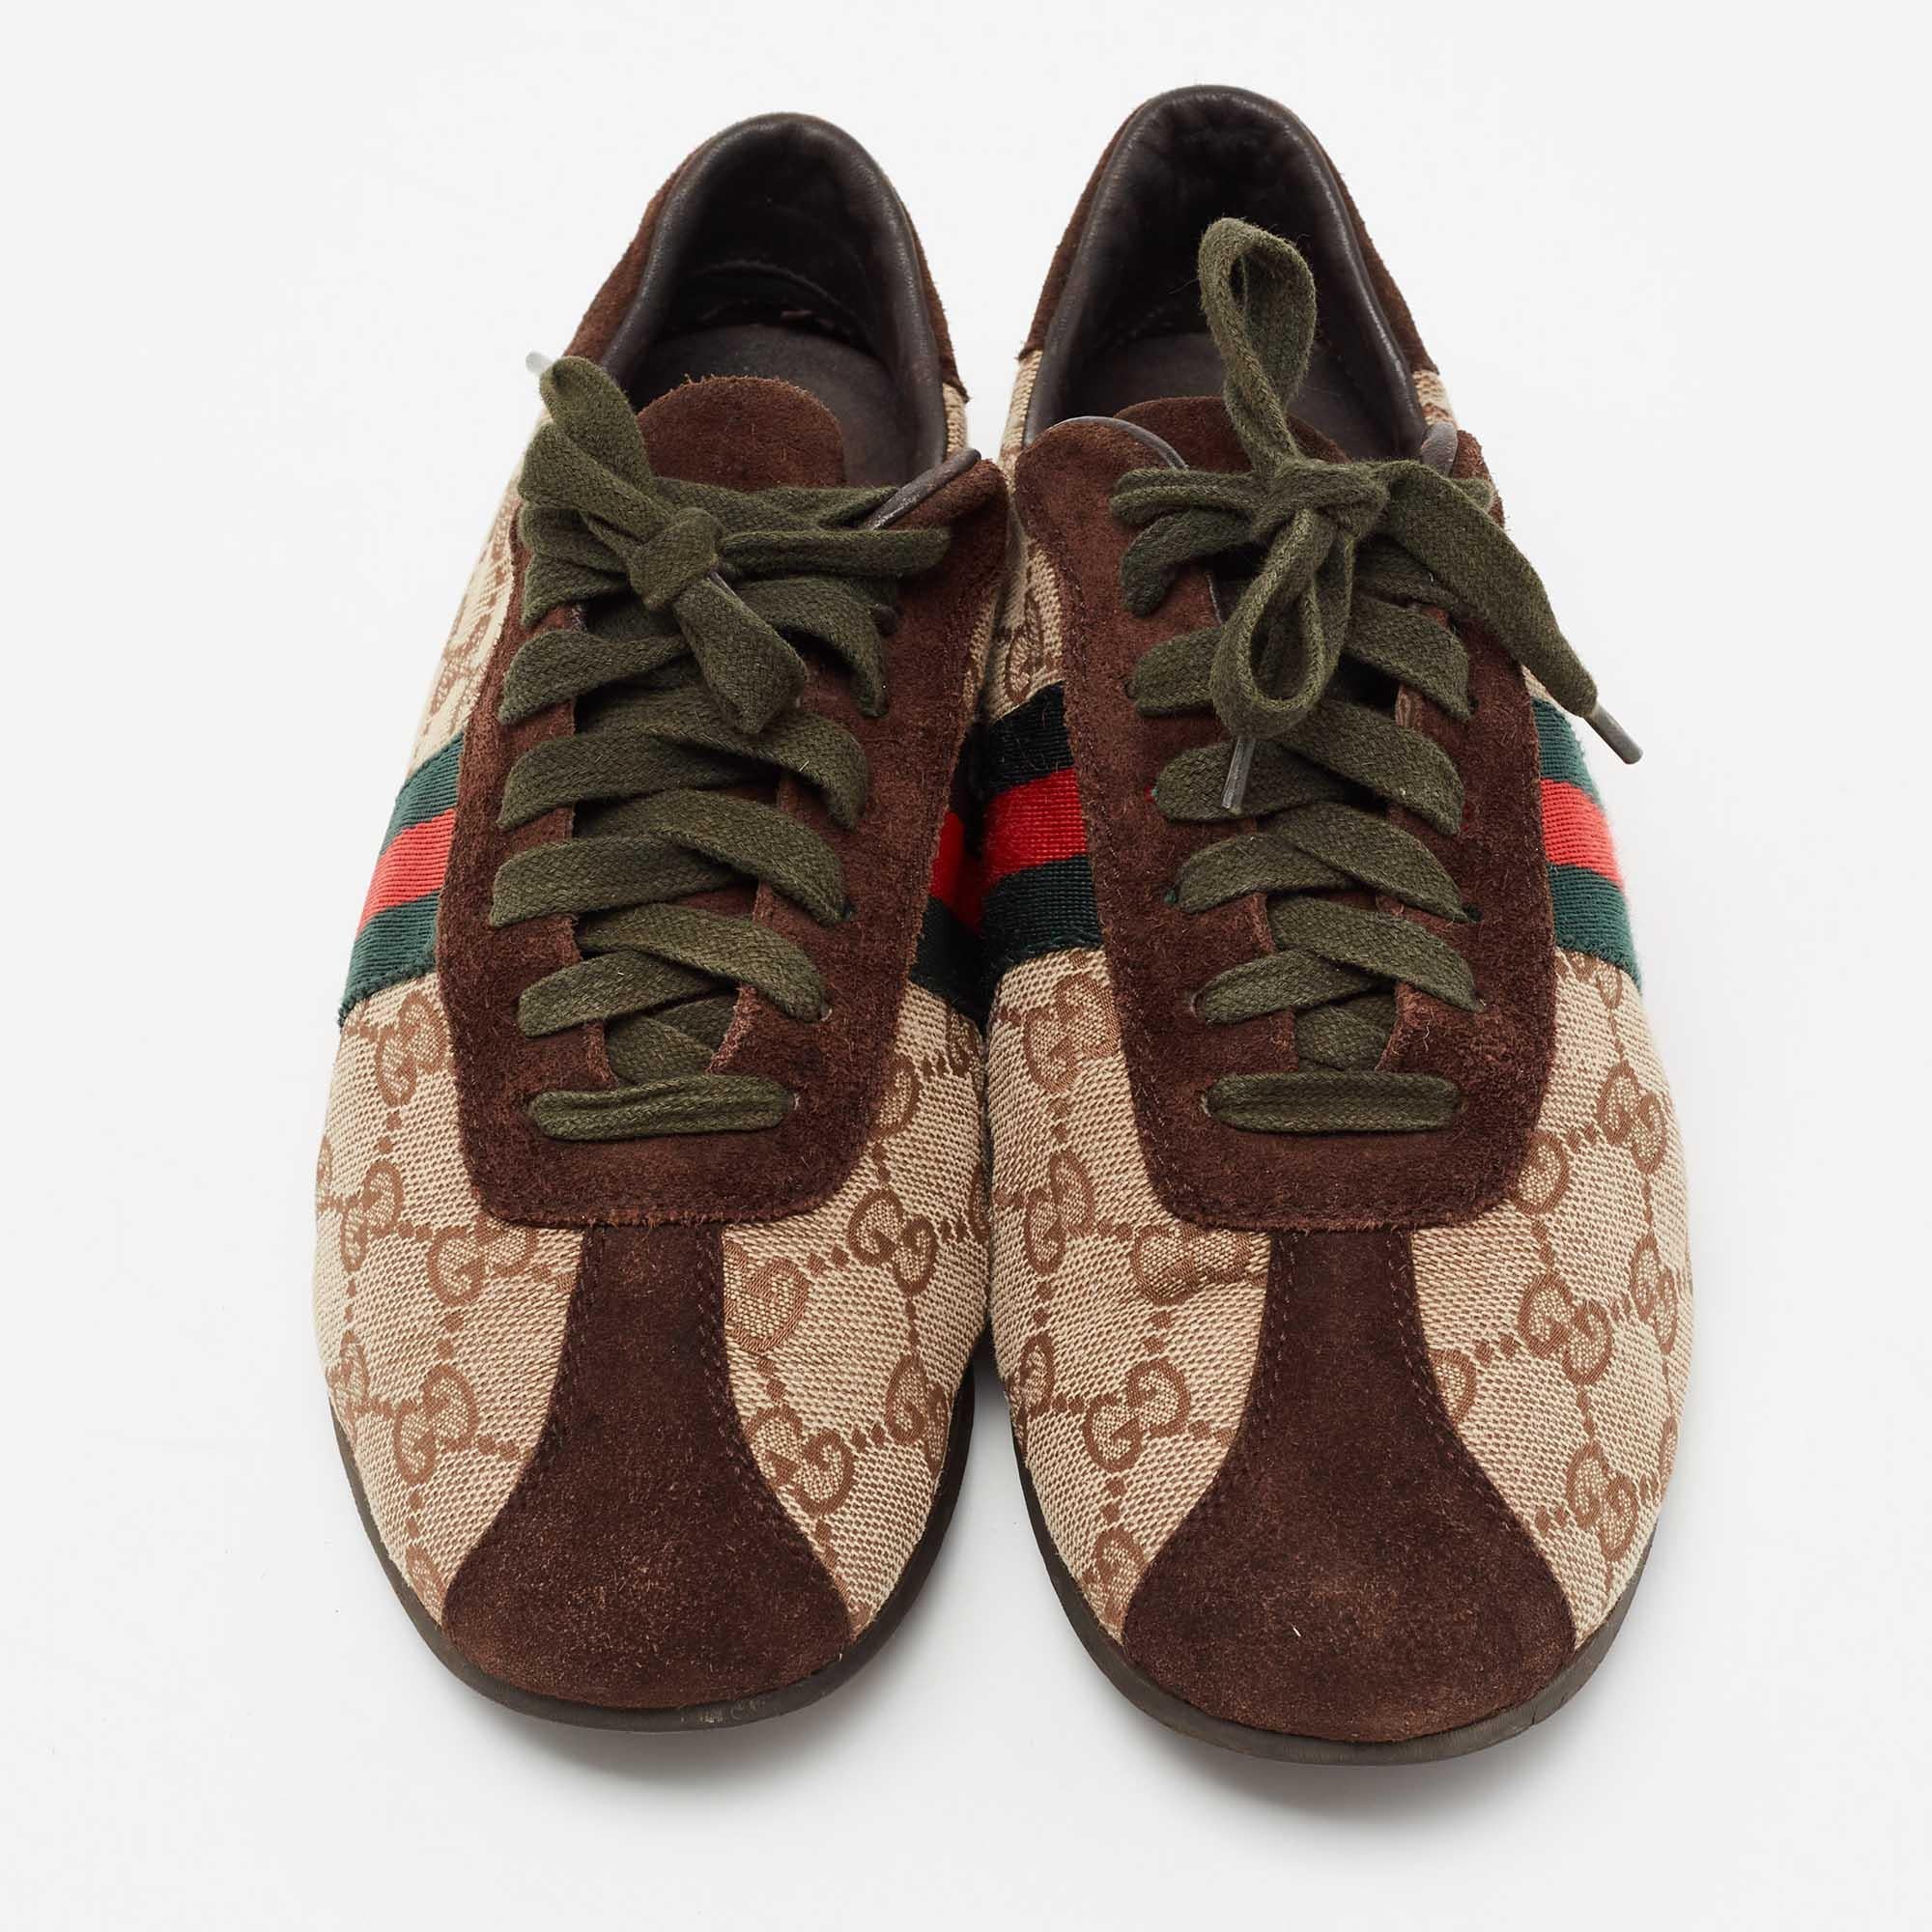 Step into these Gucci sneakers for instant comfort! They feature the iconic Web stripes and suede trims on the GG canvas exterior. The low-tops are lined with leather and finished with lace-ups. Team them with casuals for a sporty and fashionable